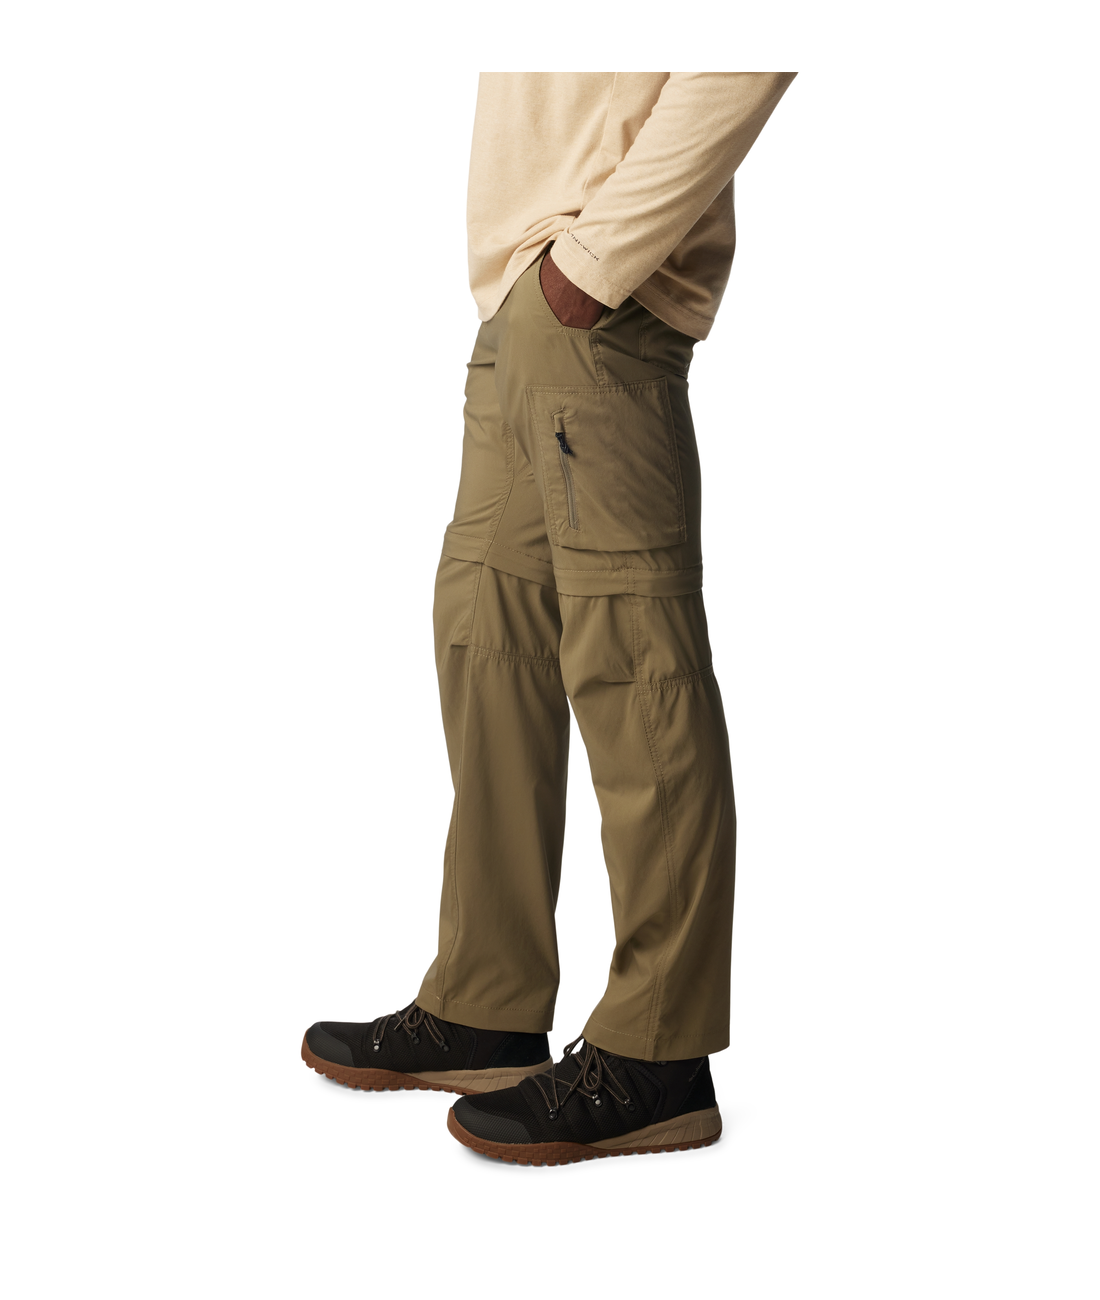 Silver Ridge Utility Convertible Pant - 32 Schrittlnge